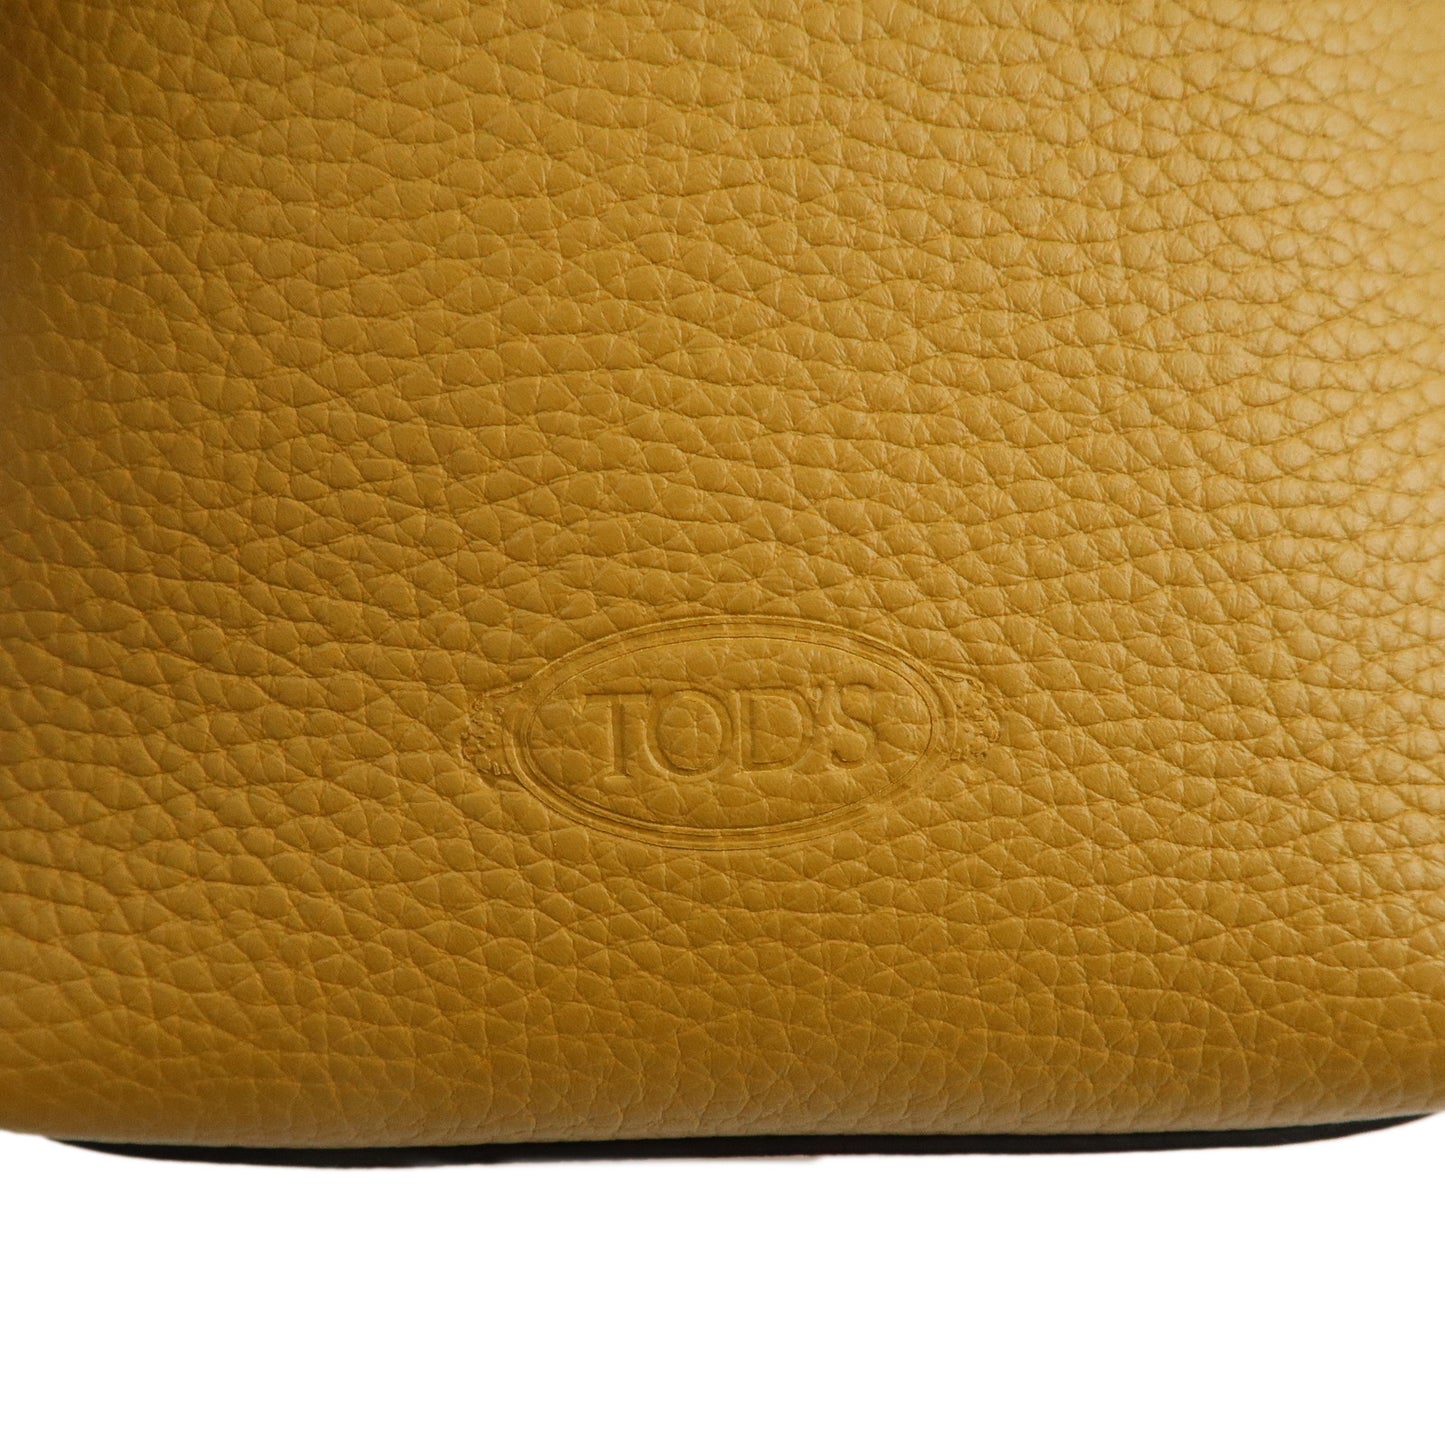 TOD'S Timeless 2 Way Leather Shoulder Bag Yellow Wine Red